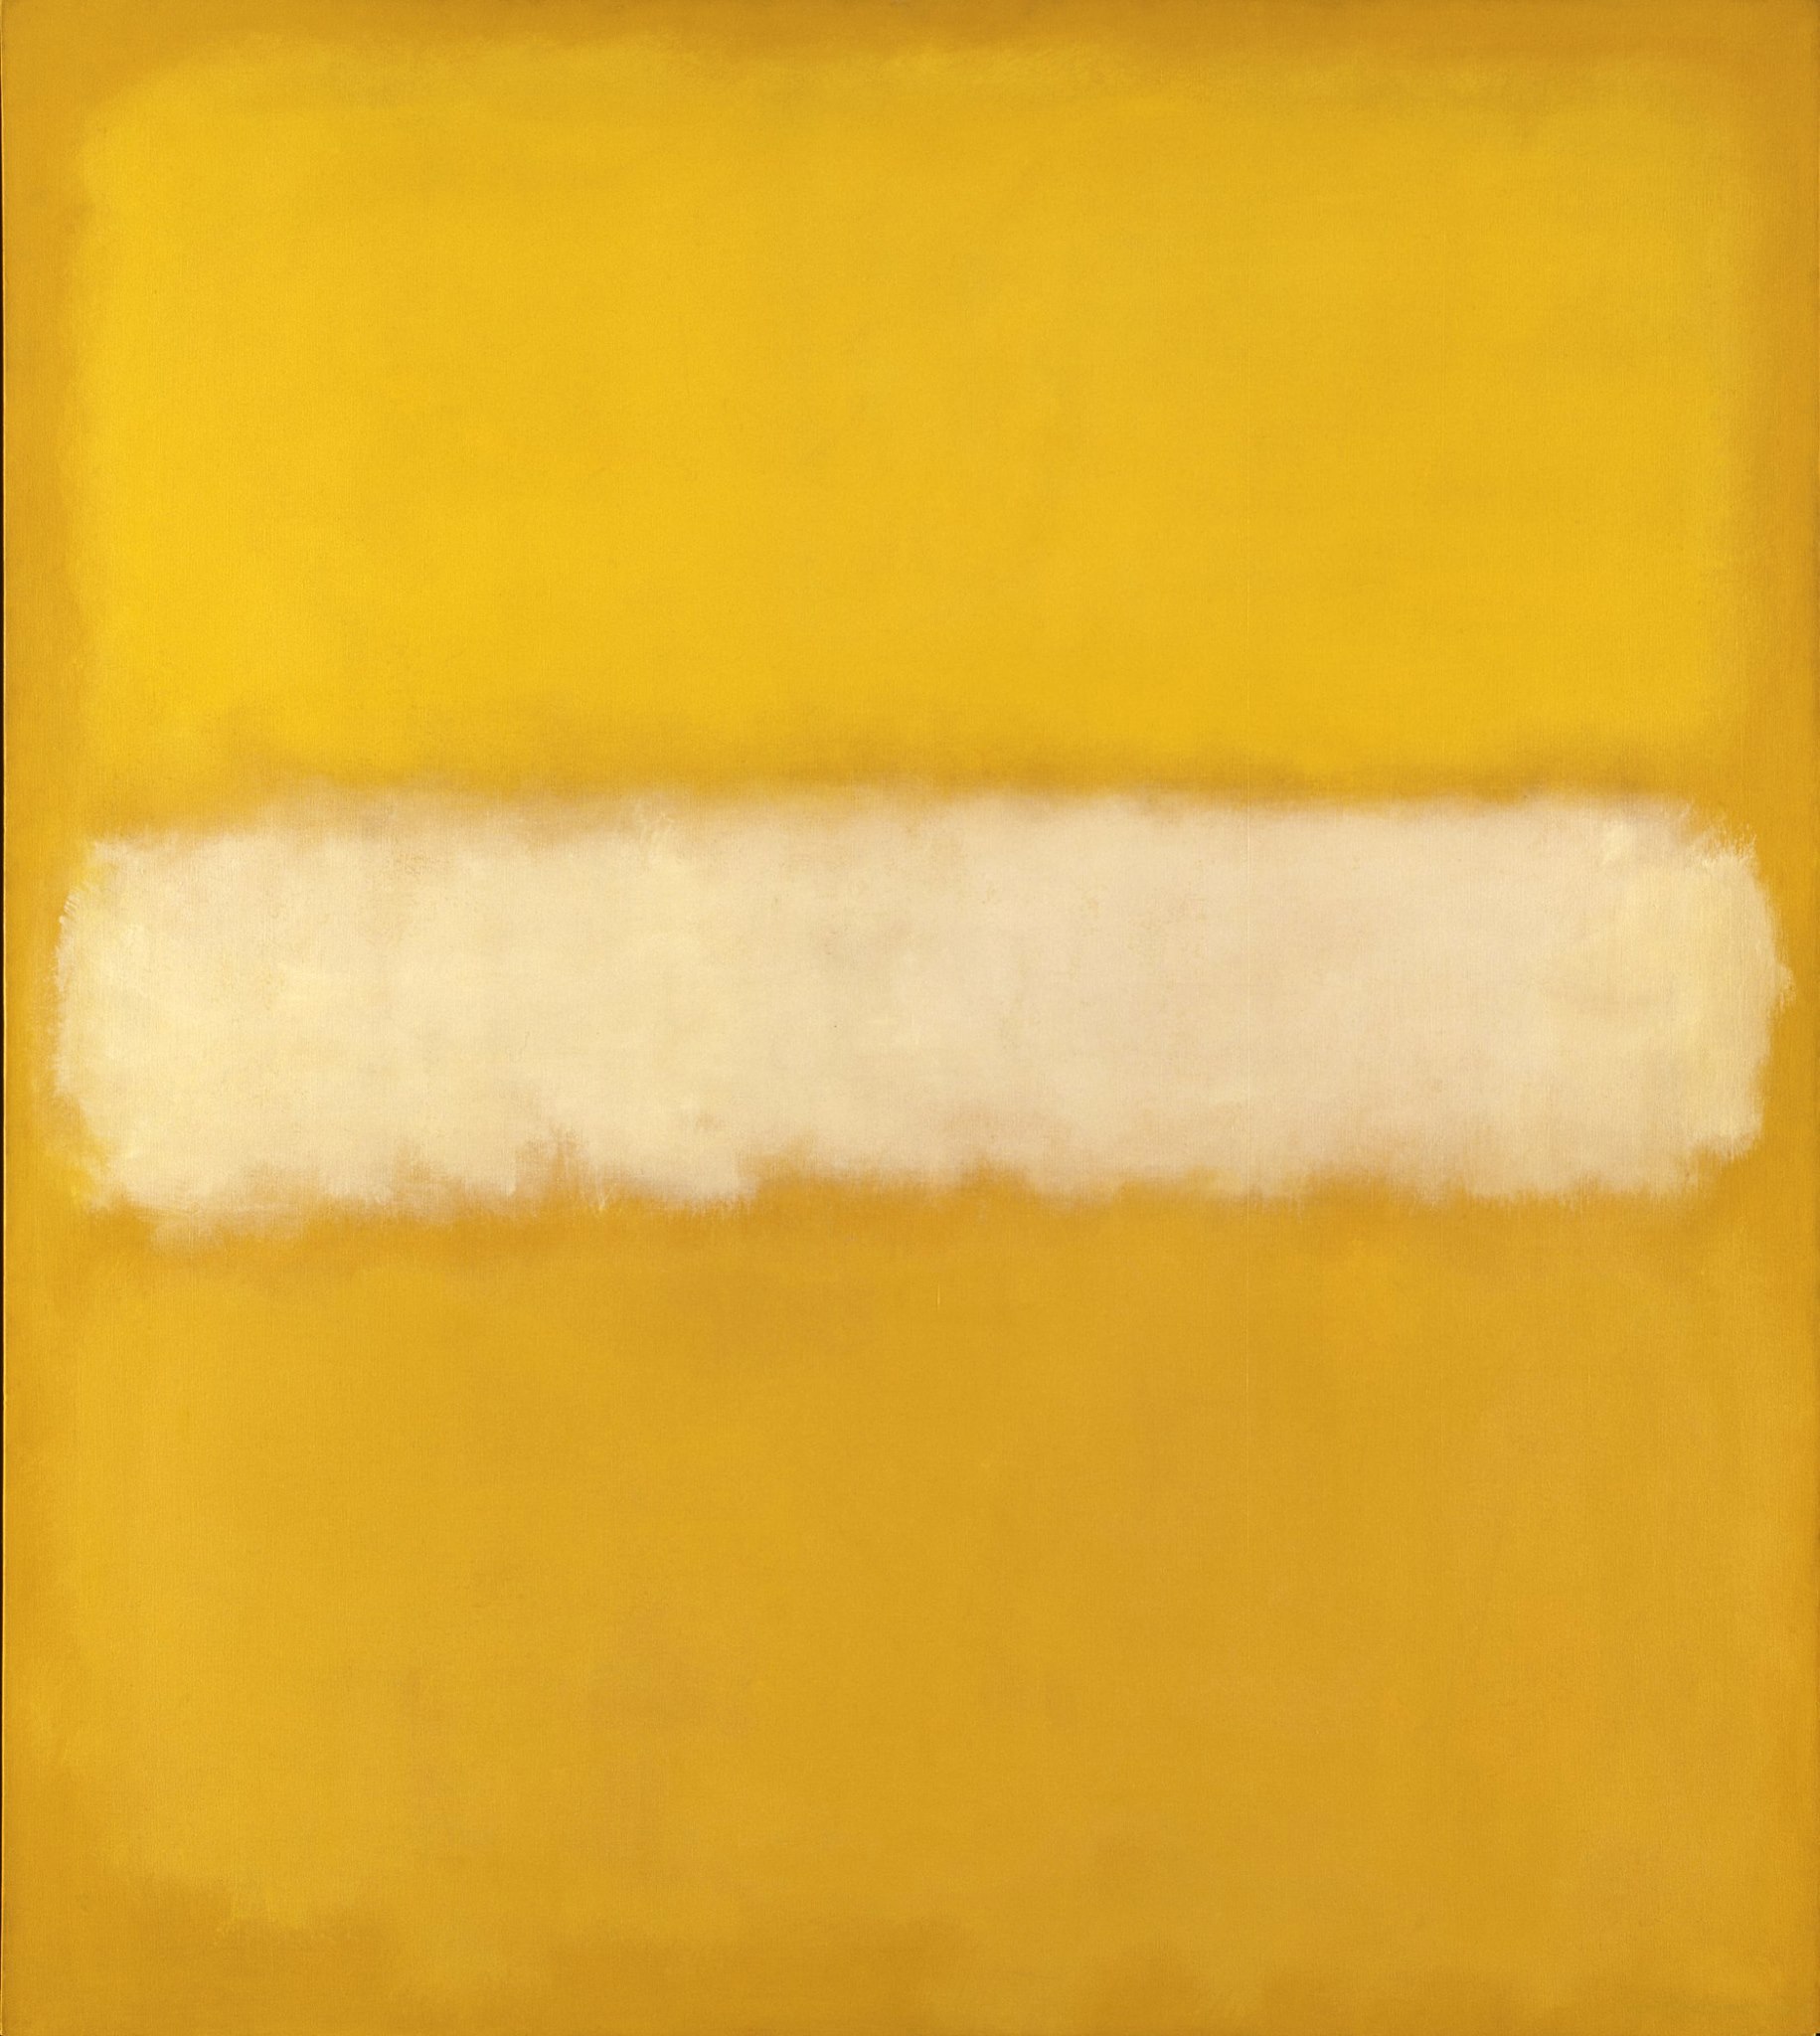 Mark Rothko's 'No. 46, 1957' is on display at the opening of the exhibition  'Keys to a Passion' at the Louis Vuitton Foundation in Paris, France,  Monday, March 30, 2015. The exhibition